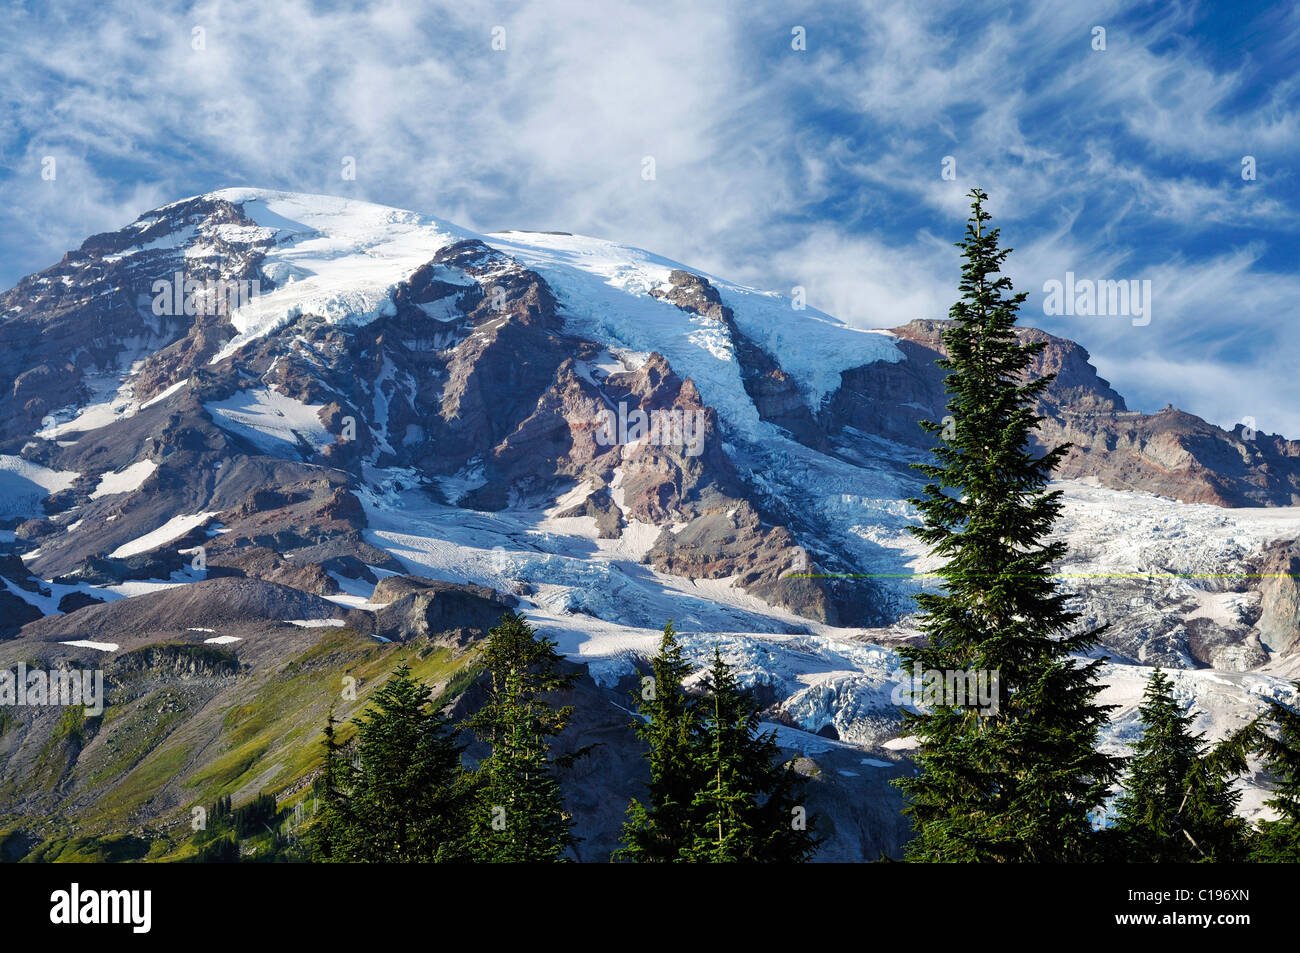 View of the Mount Rainier Glacier from the Nisqually Glacier View, Mount Rainier National Park, Washington, USA, North America Stock Photo